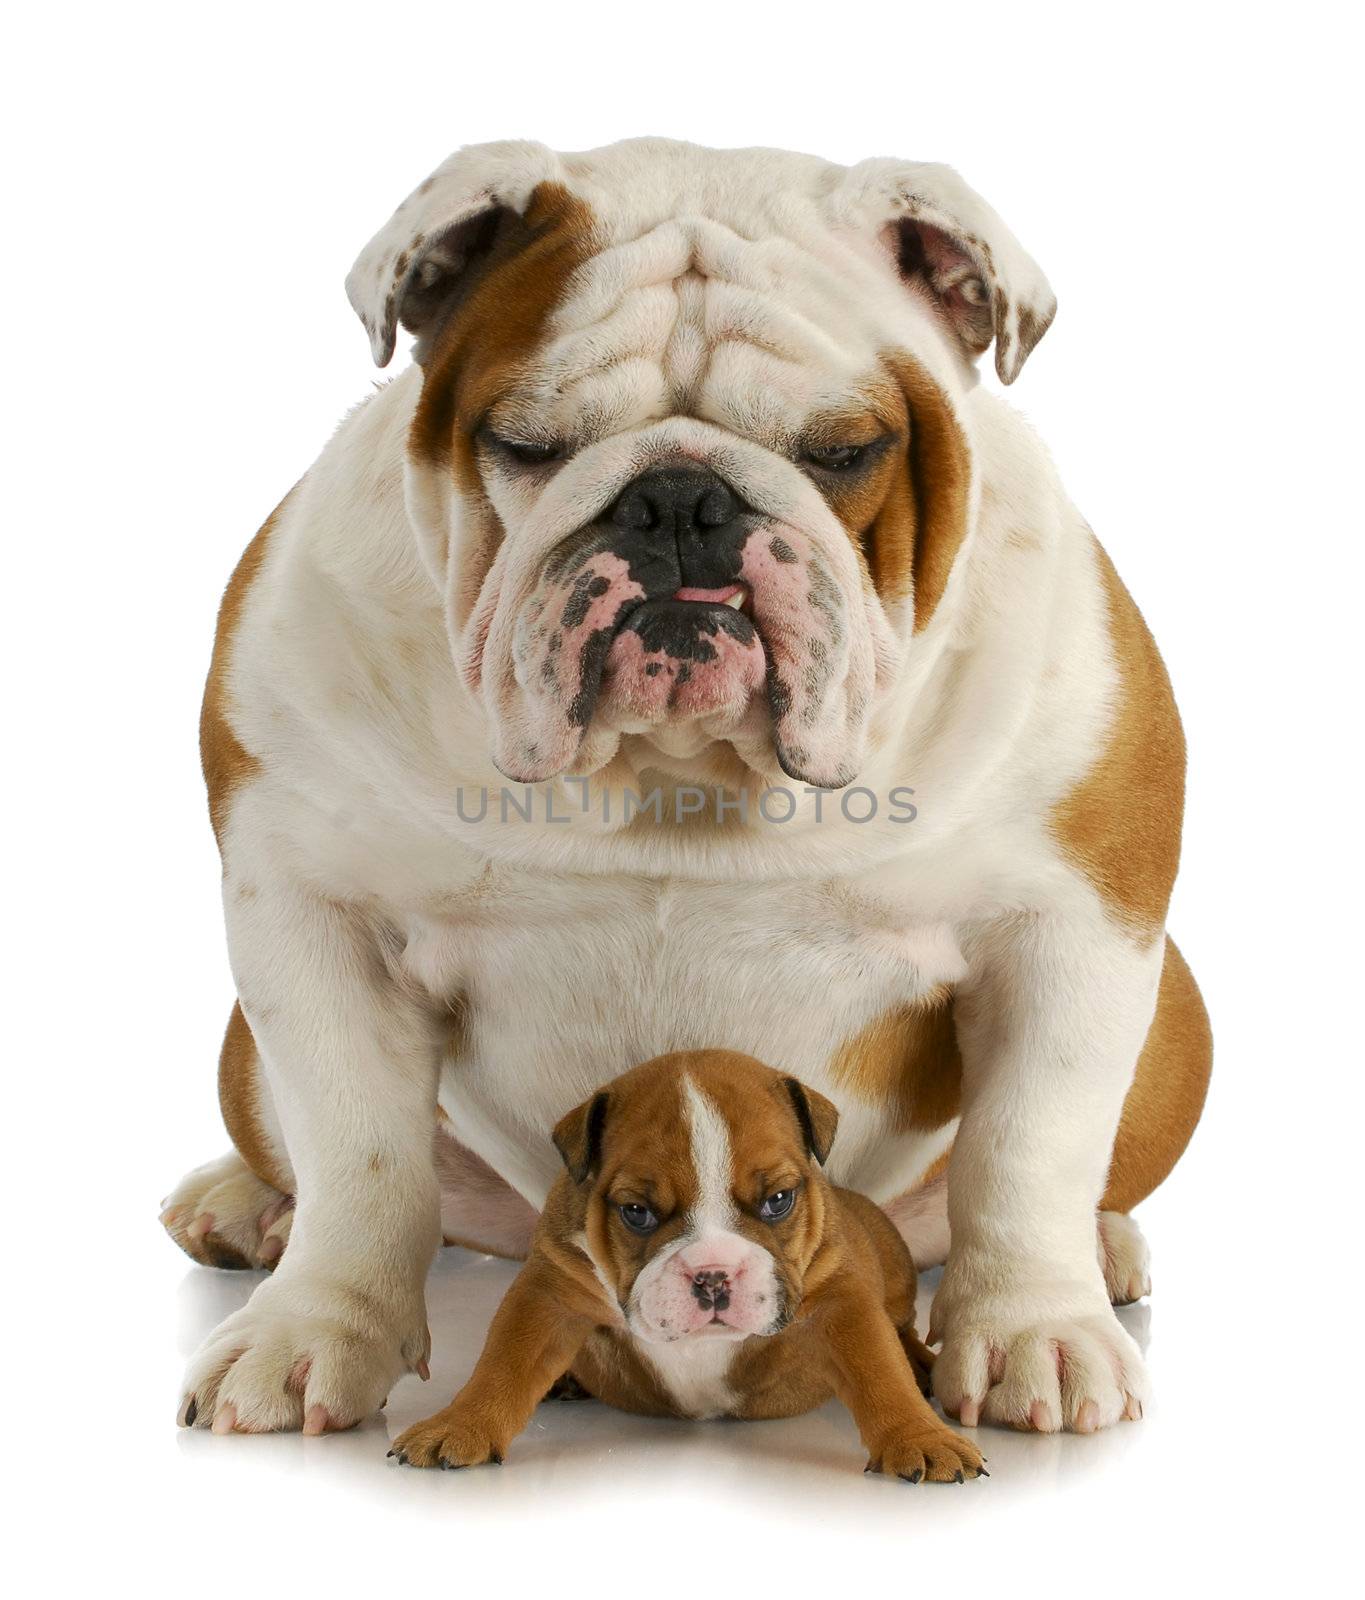 father and son - english bulldog father and four week old son sitting on white background